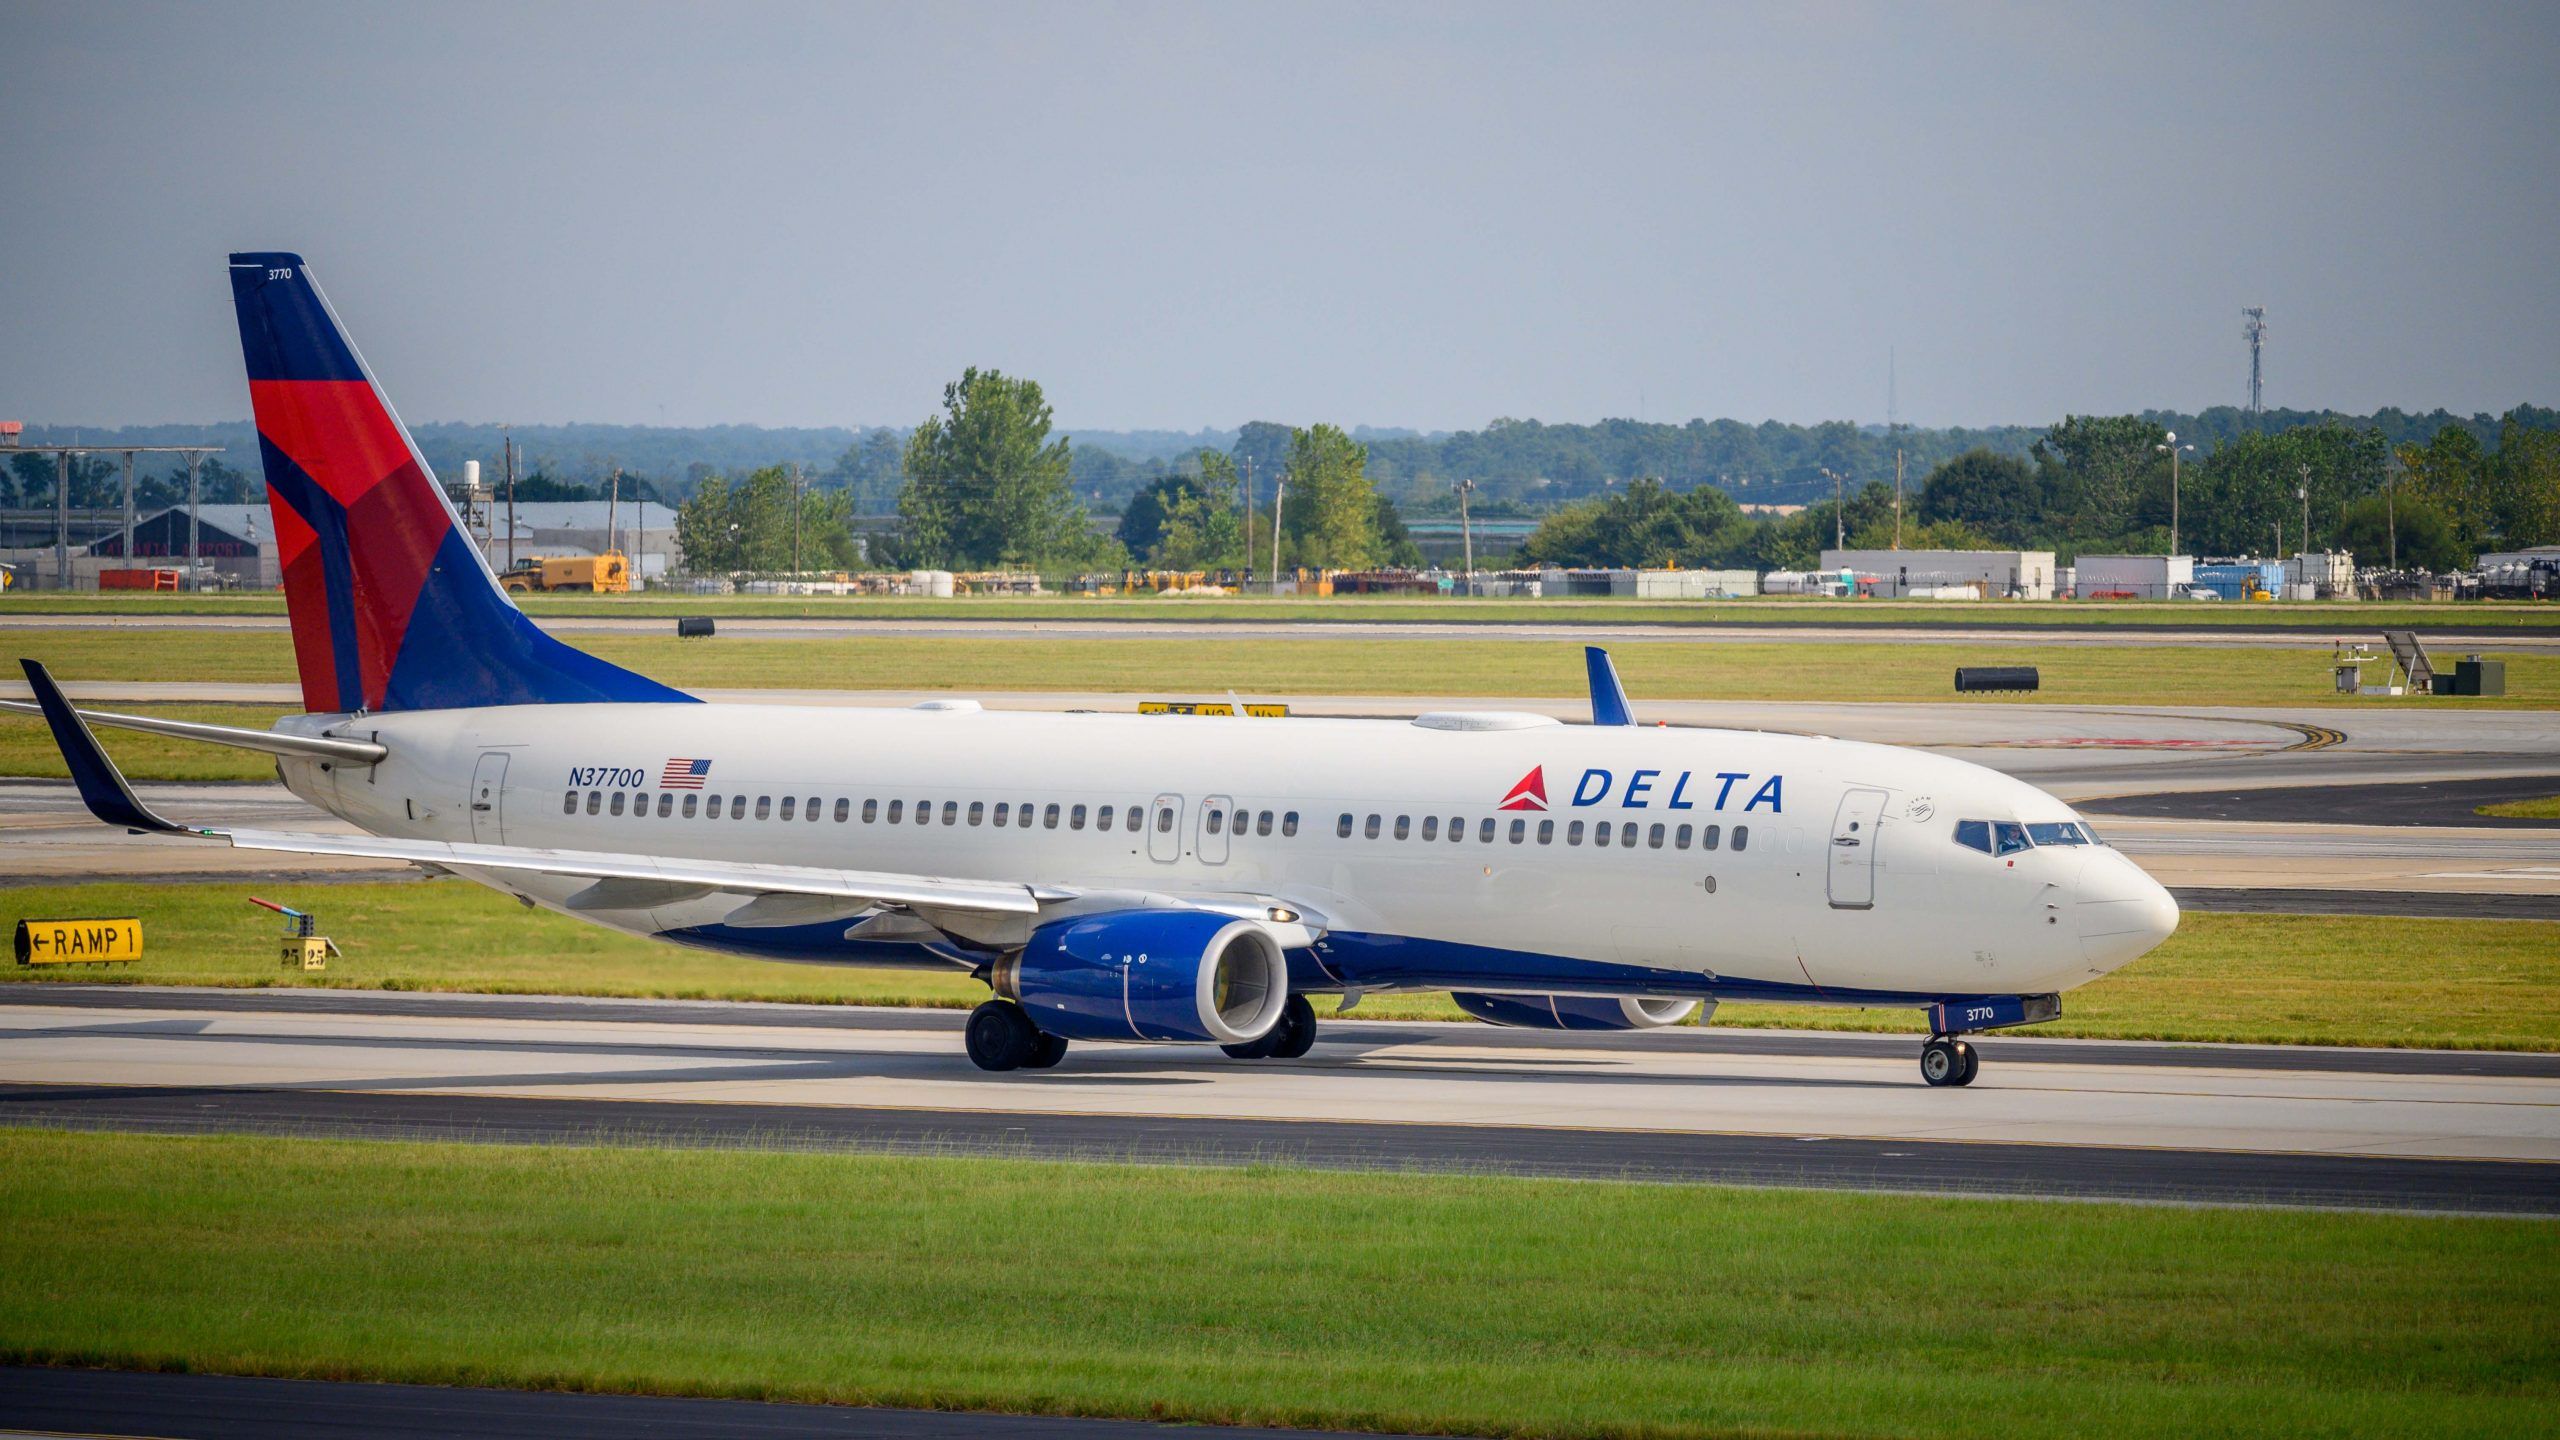 From love to breakup: Is Delta's loyalty program transformation a recipe for disaster?